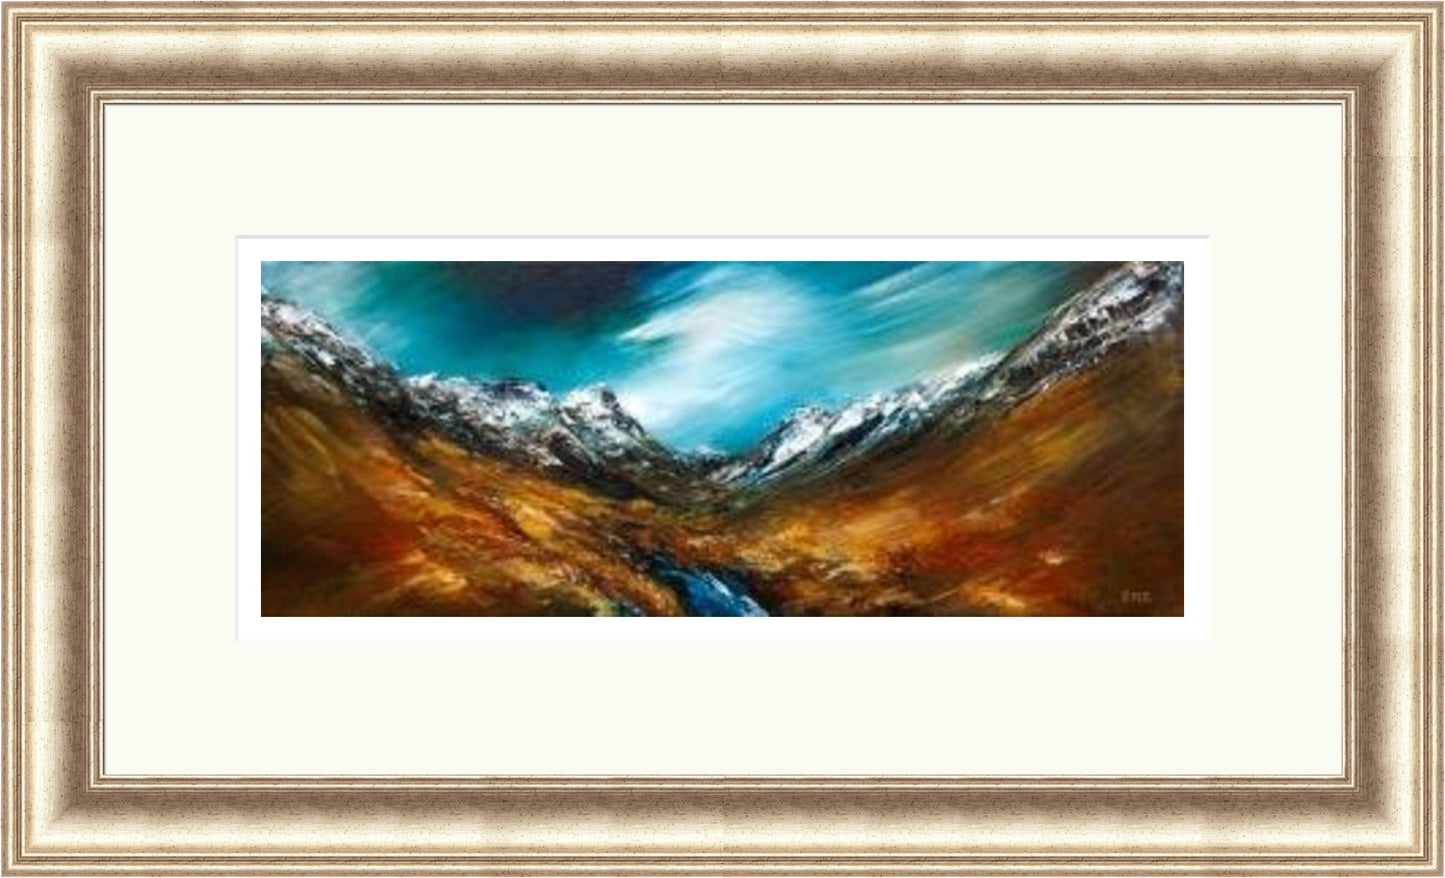 The Pass of Glencoe by Grace Cameron